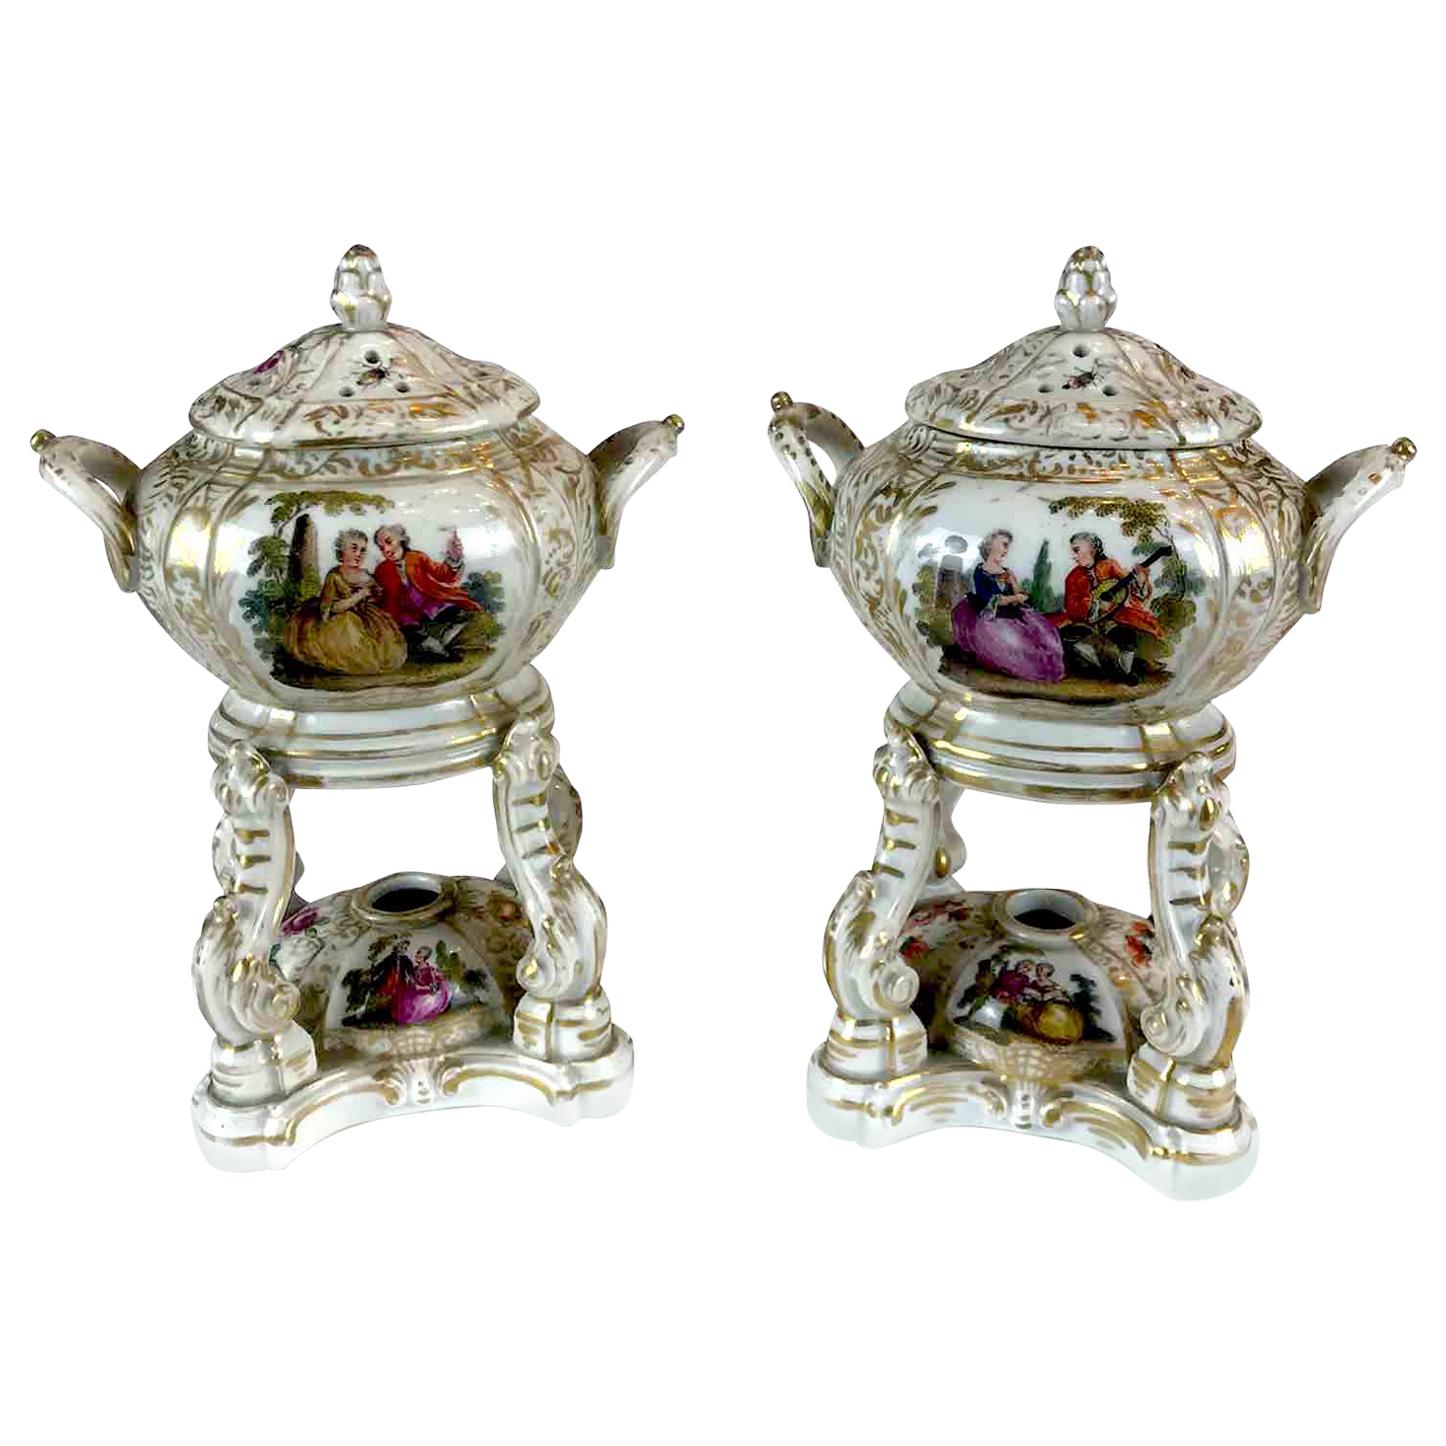 Early 19th Century Pair of German Porcelain Pastille Incense Burners by KPM Berlin, 1820 For Sale